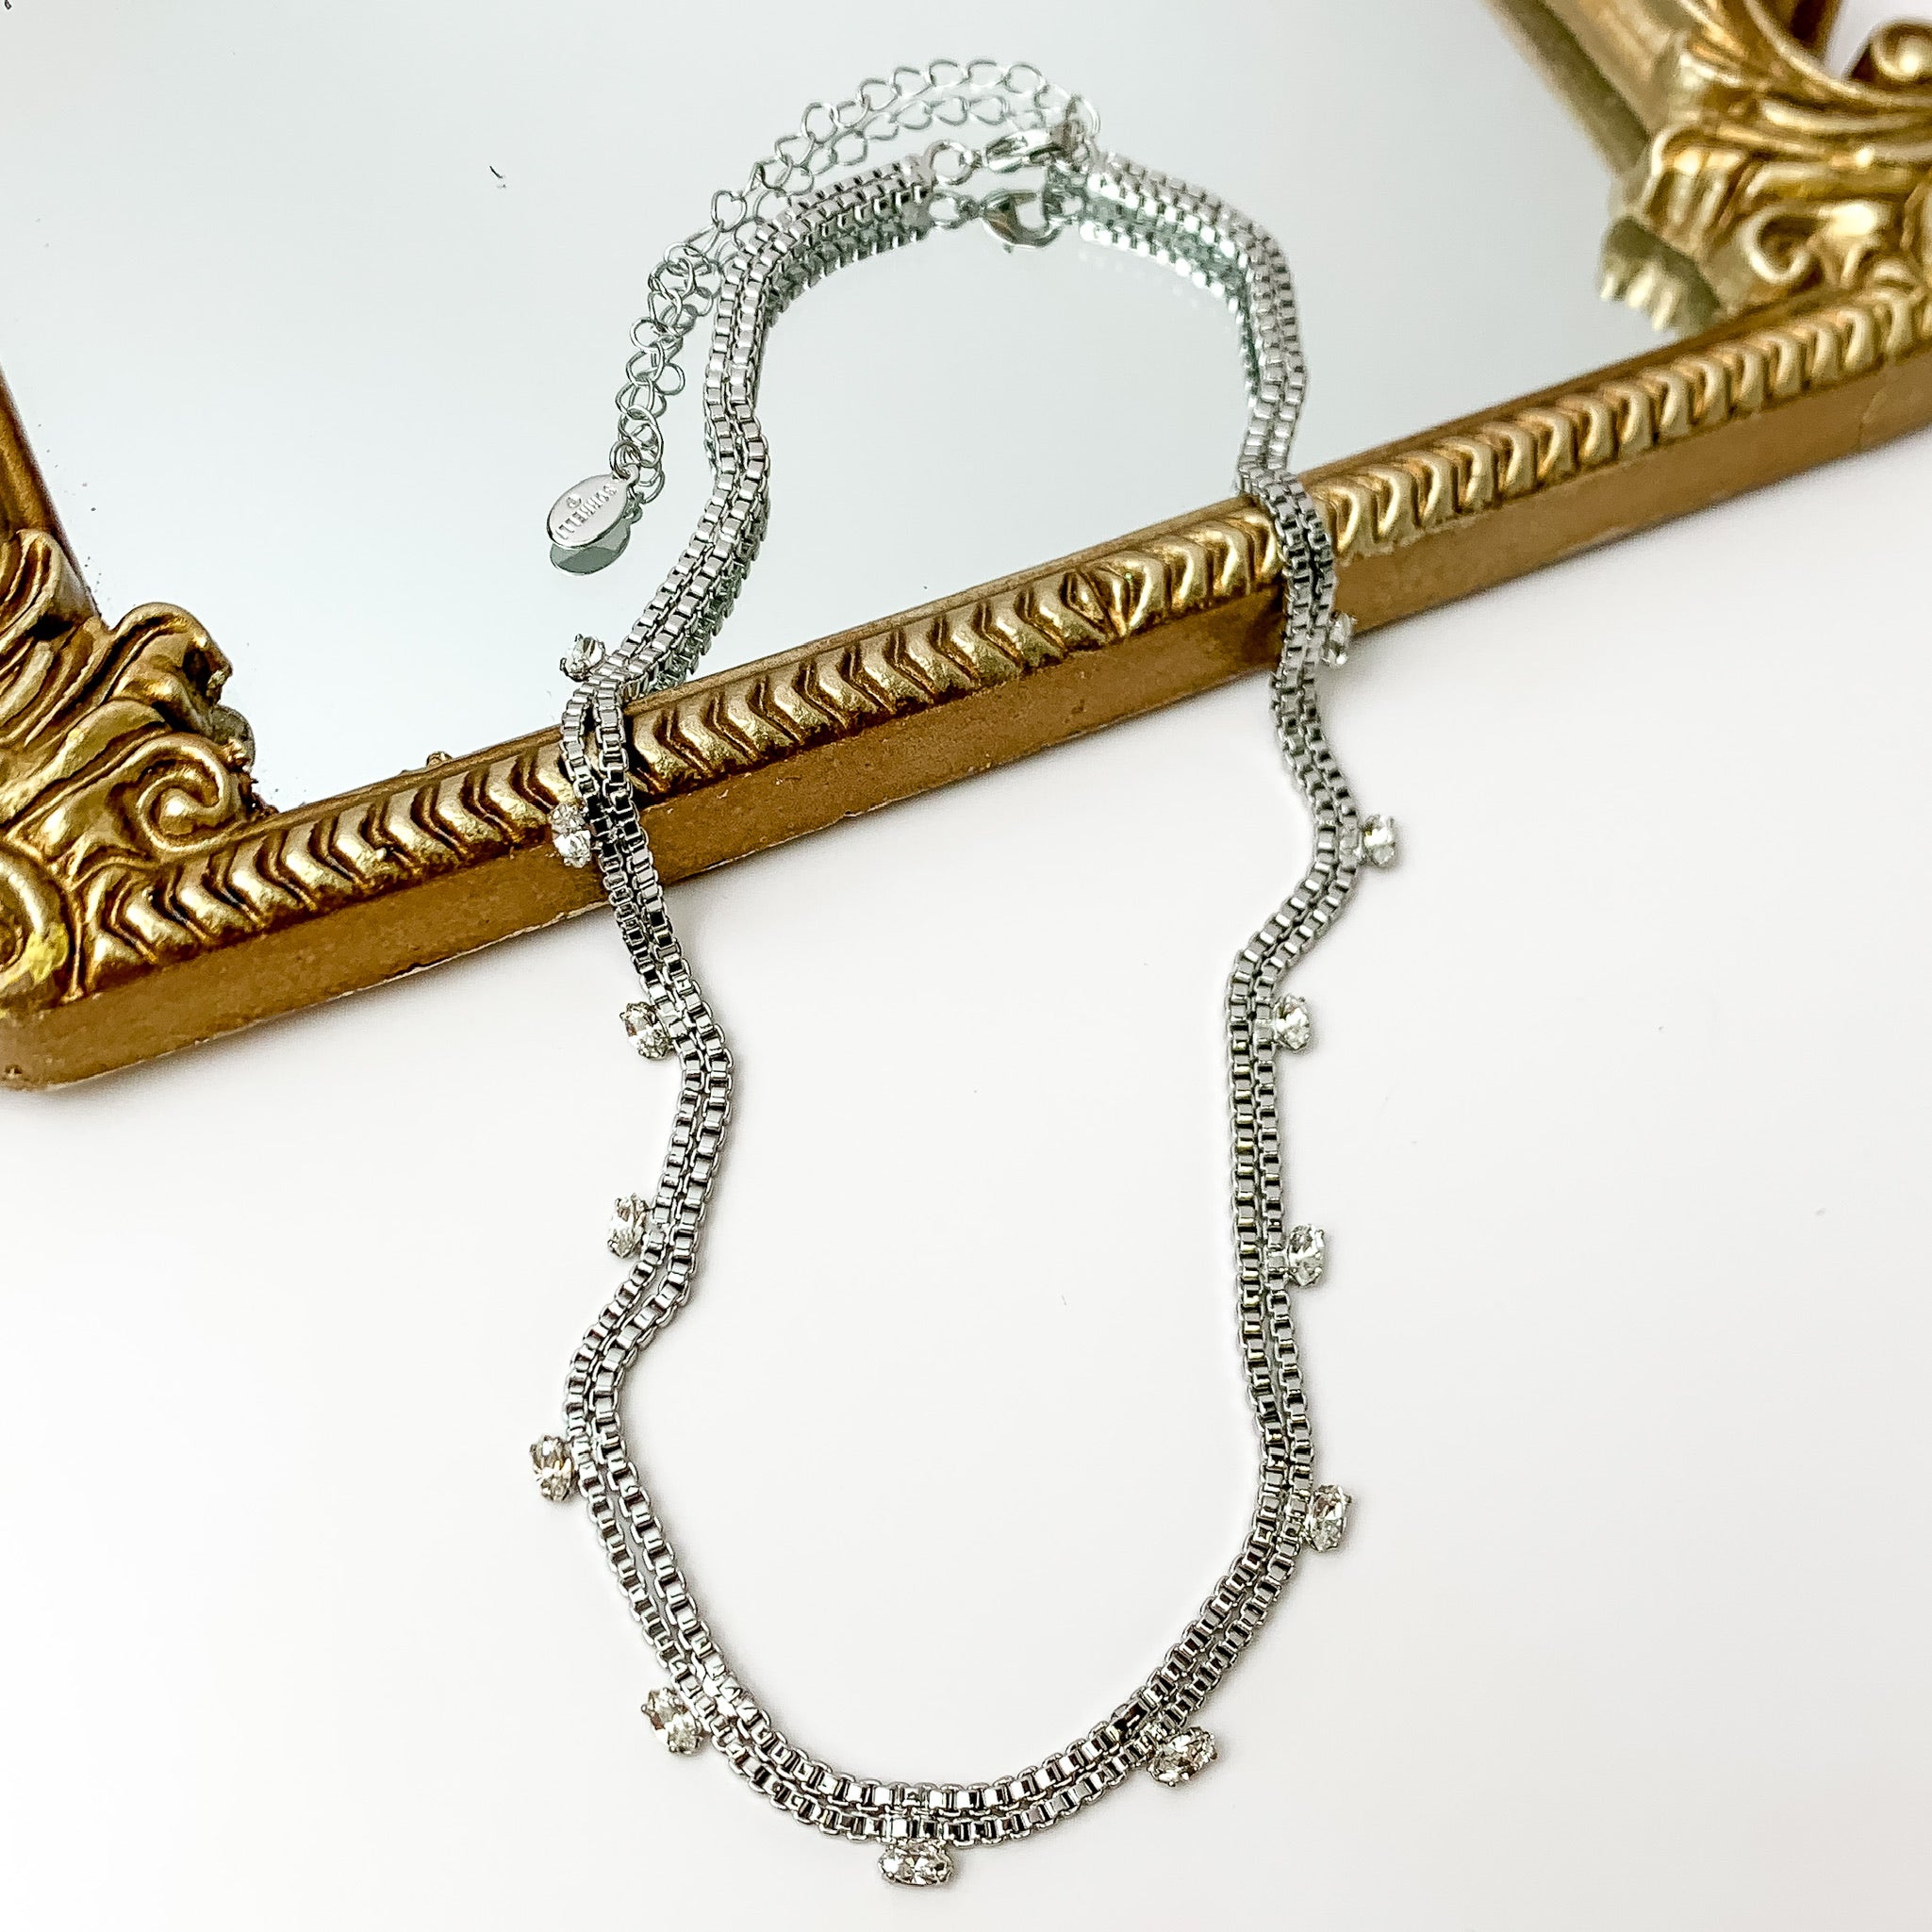 Pictured is a double, silver box chain necklace with clear crystal charm. This necklace is pictured partially laying on a gold mirror on a white background.    